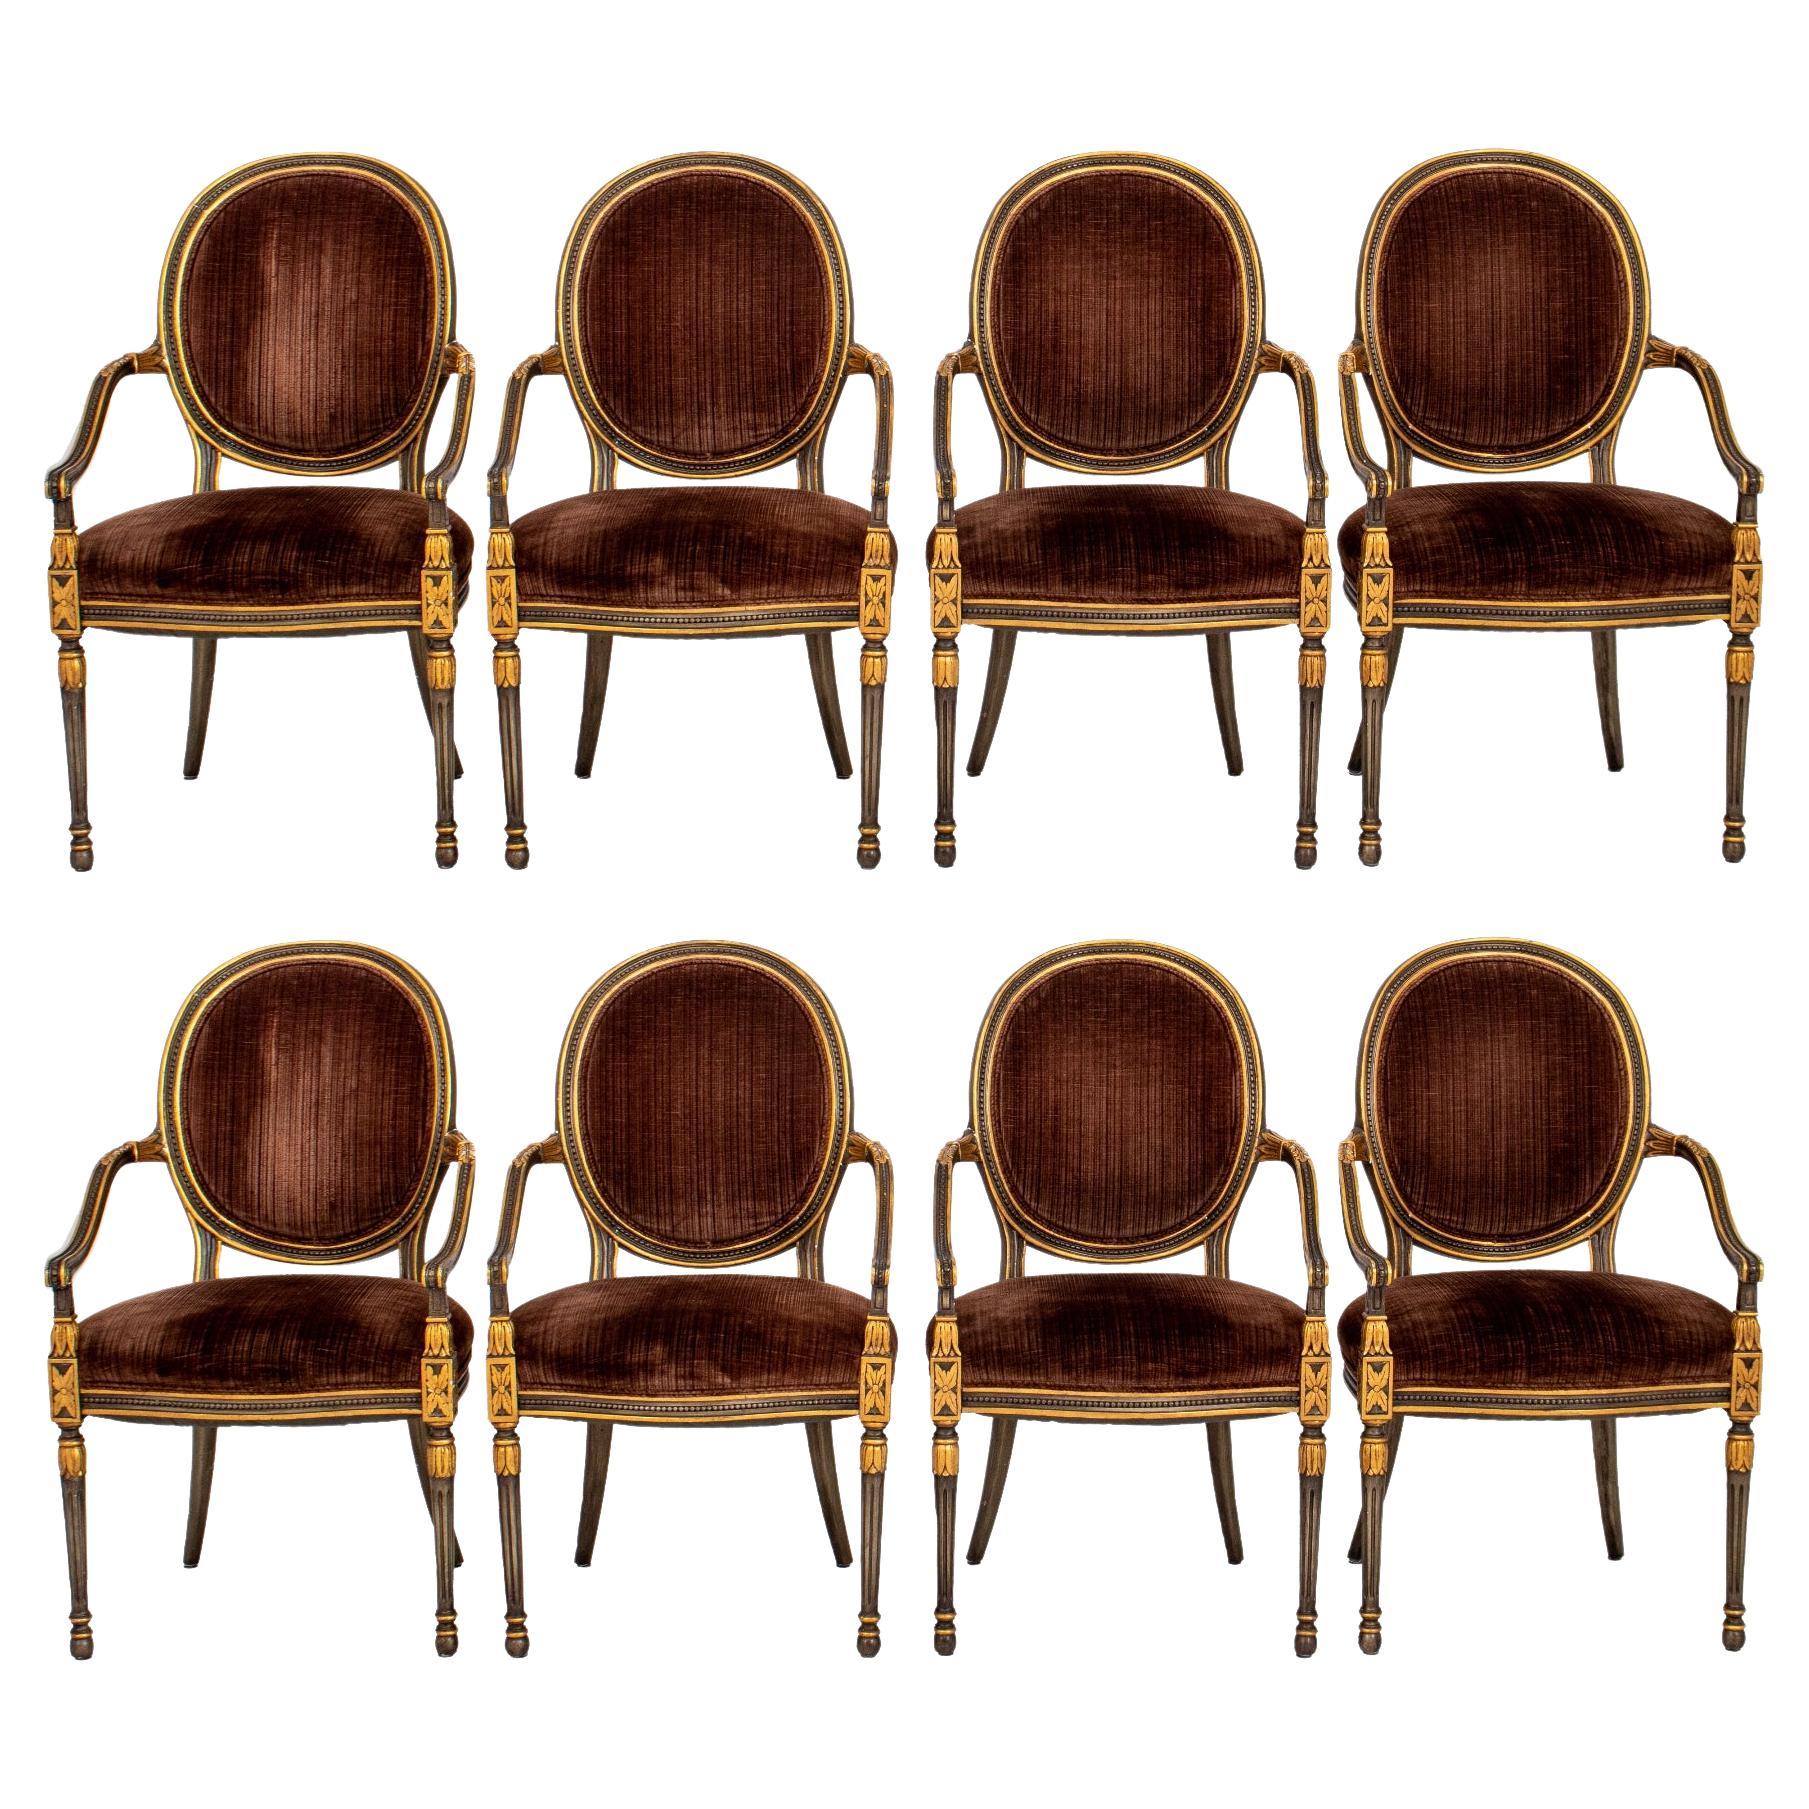 Regency Revival Gilt Wood Dining Chairs, Set of Eight